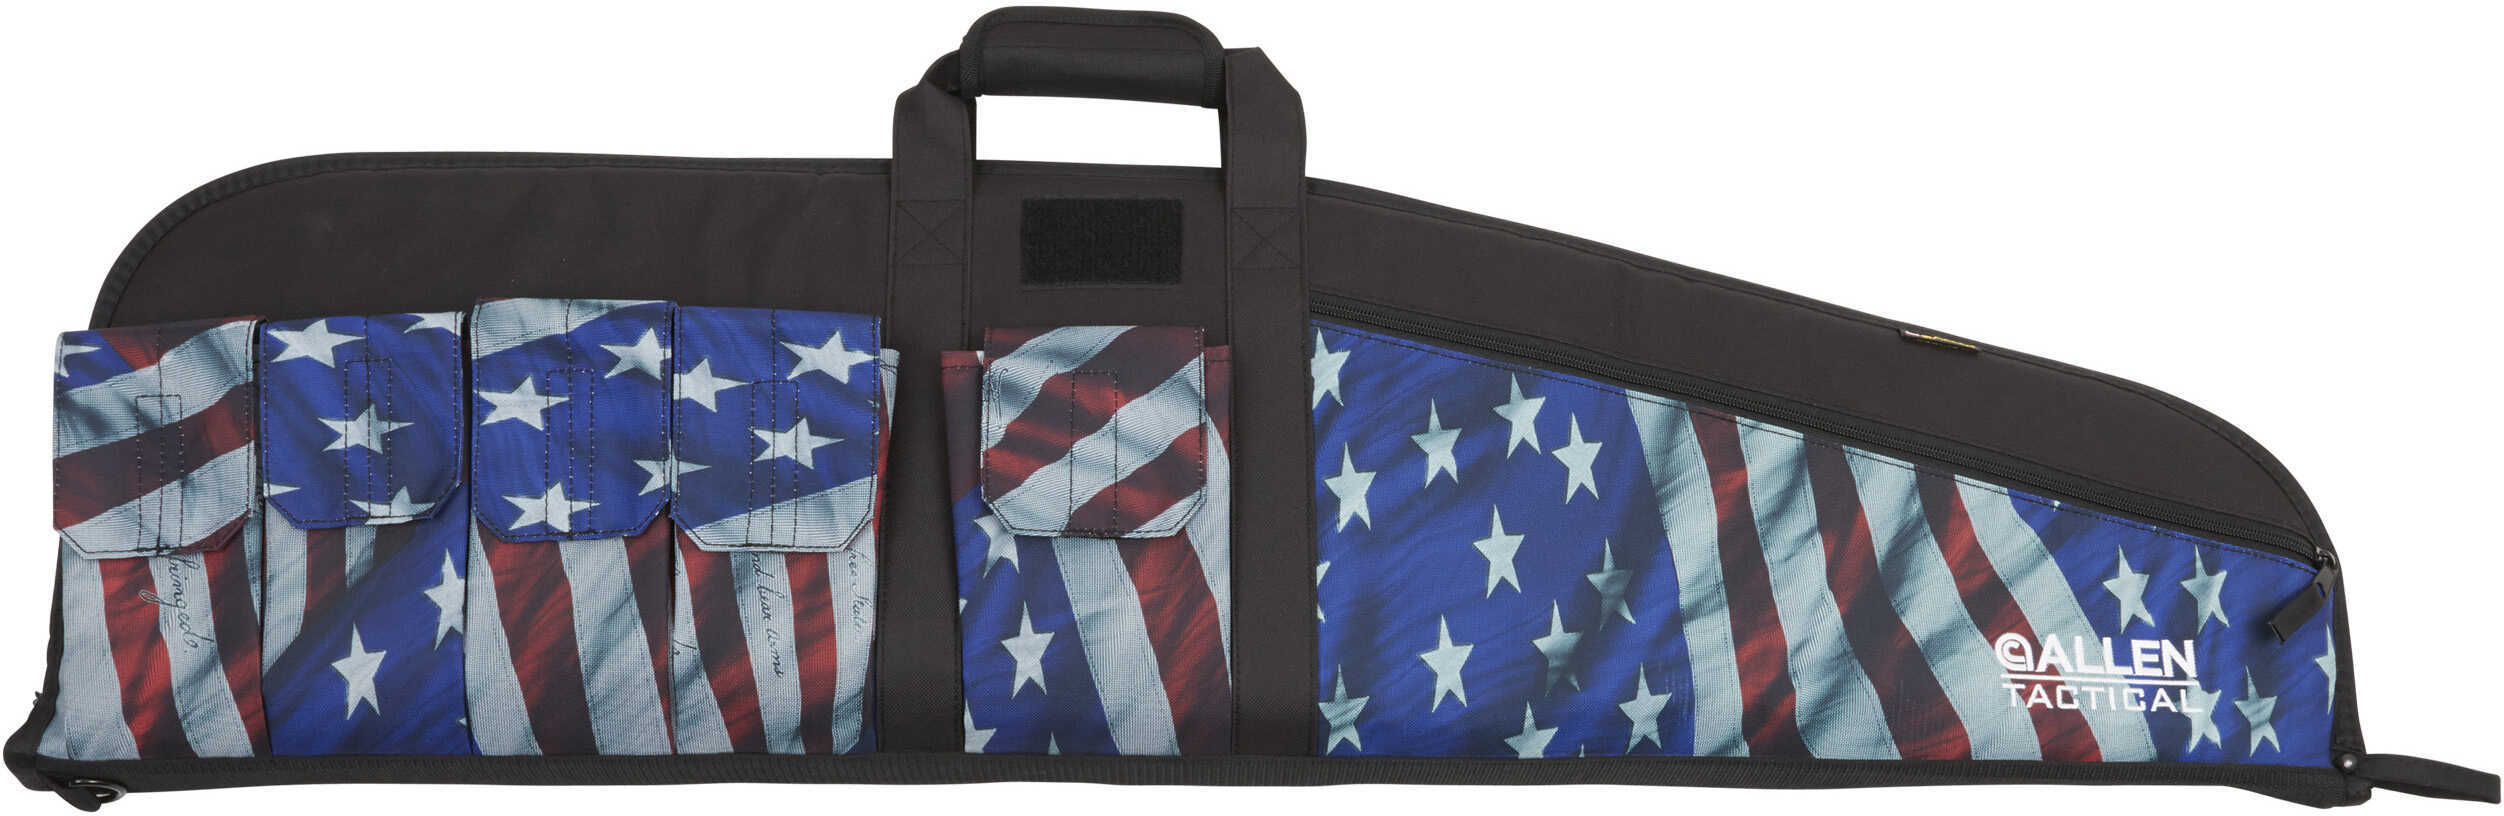 Allen Victory Tactical Single Rifle Case, 42", AmericanFlag Finish, Endura Fabric 1062